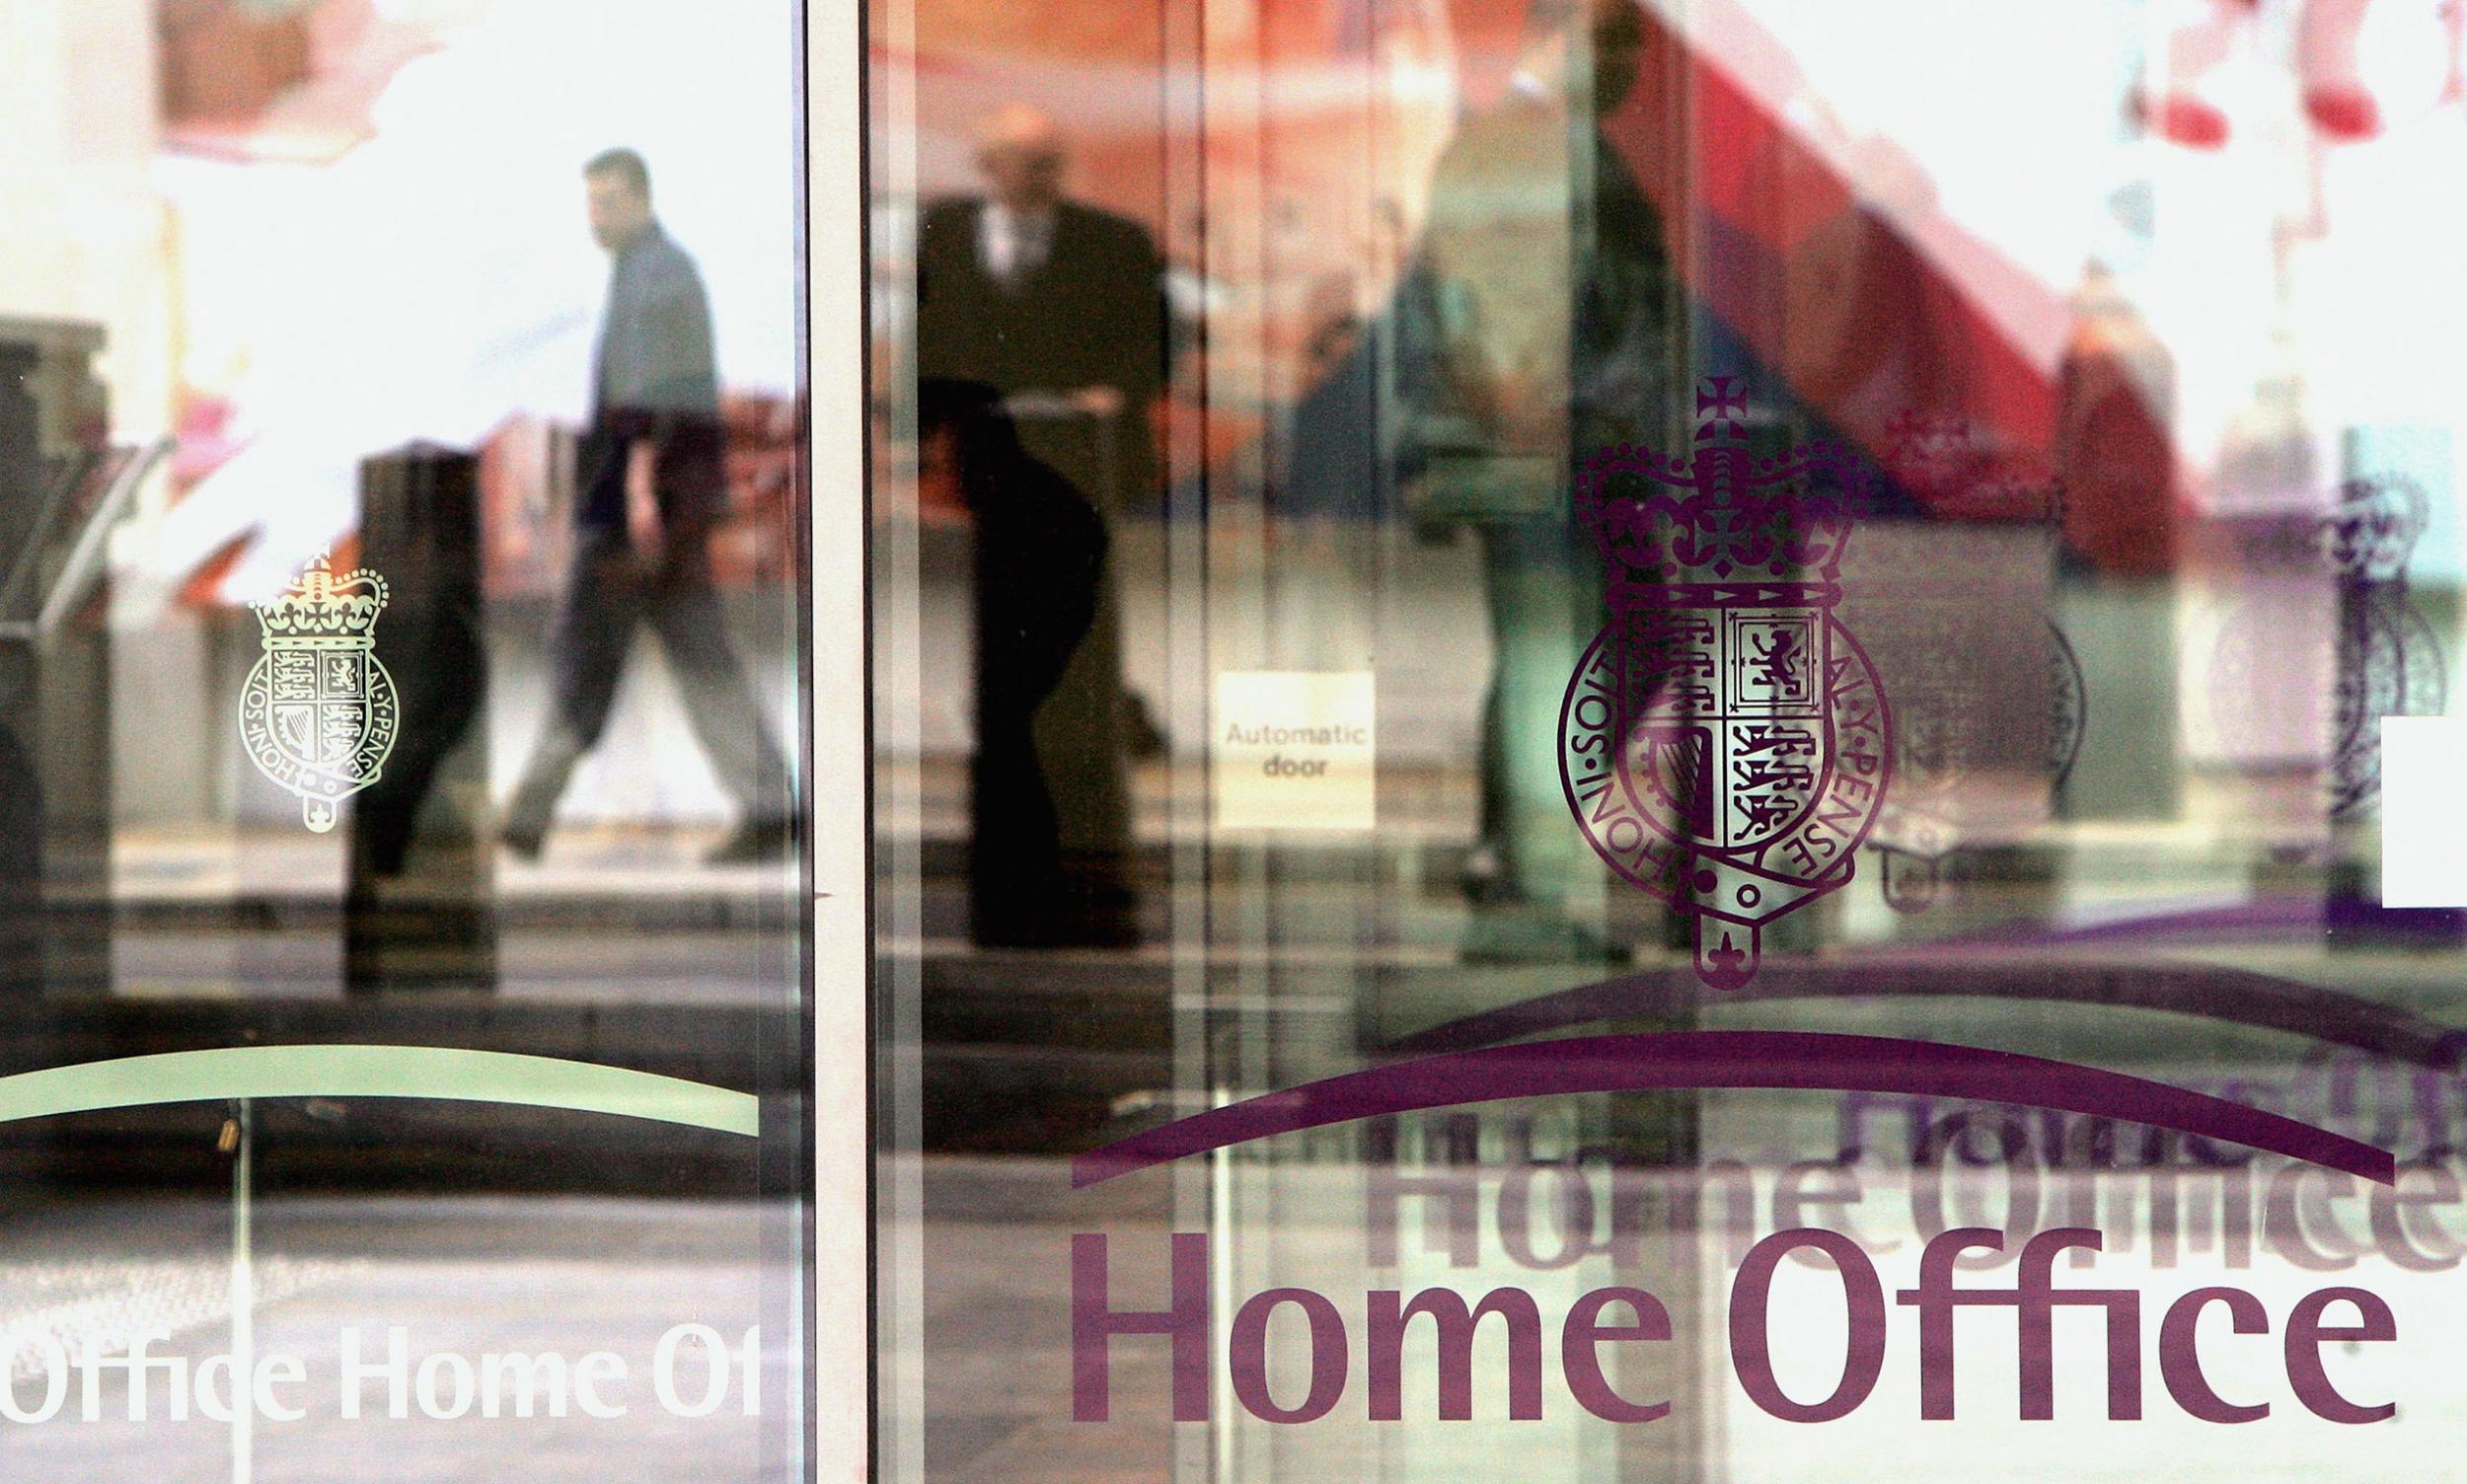 The Home Office has previously said that it aims to decide straightforward asylum applications within six months